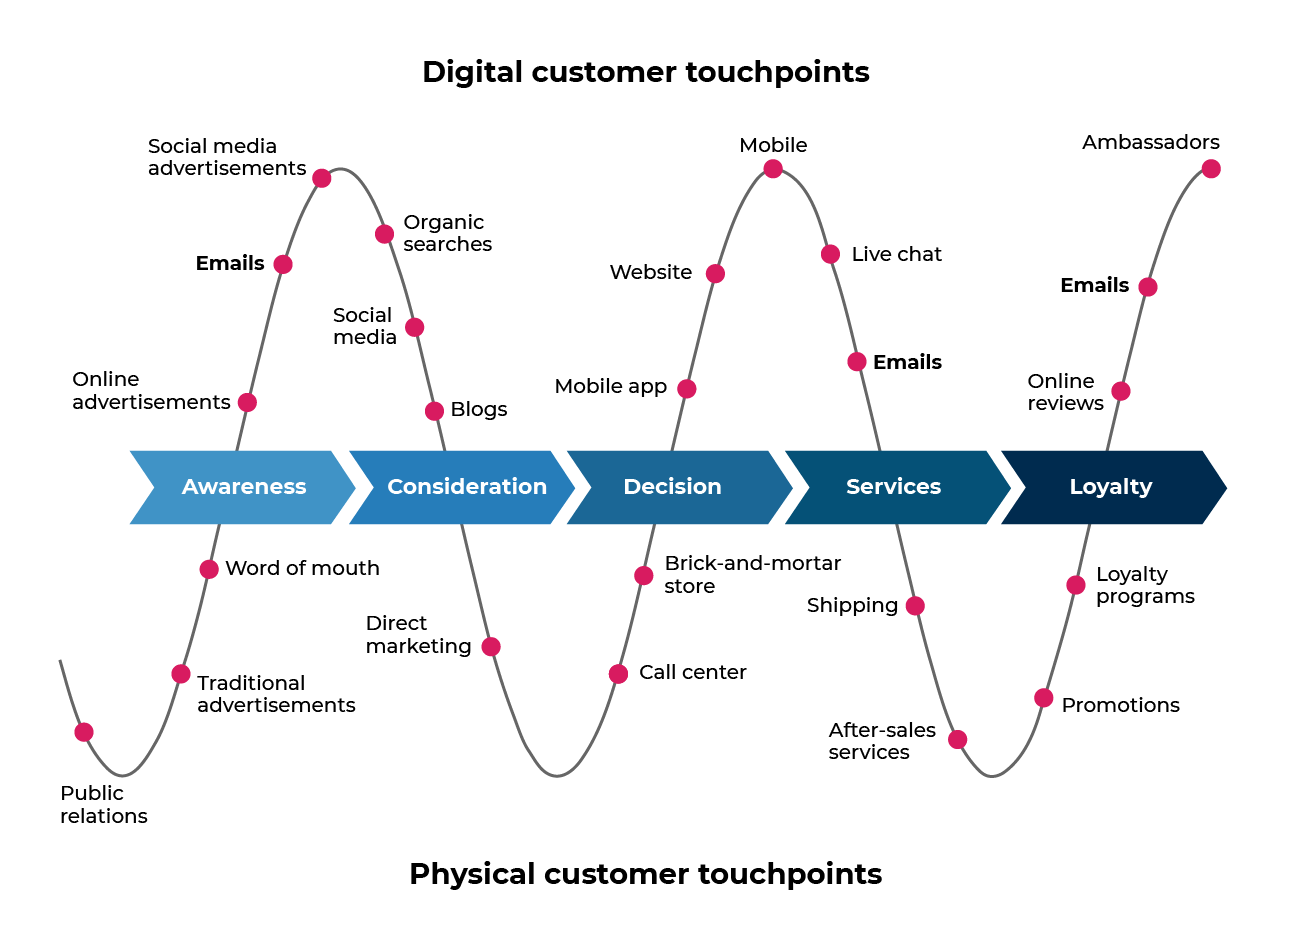 Timeline listing the different digital and physical touchpoints along the different phases of the journey: Awareness, Consideration, Decision, Services, Loyalty.